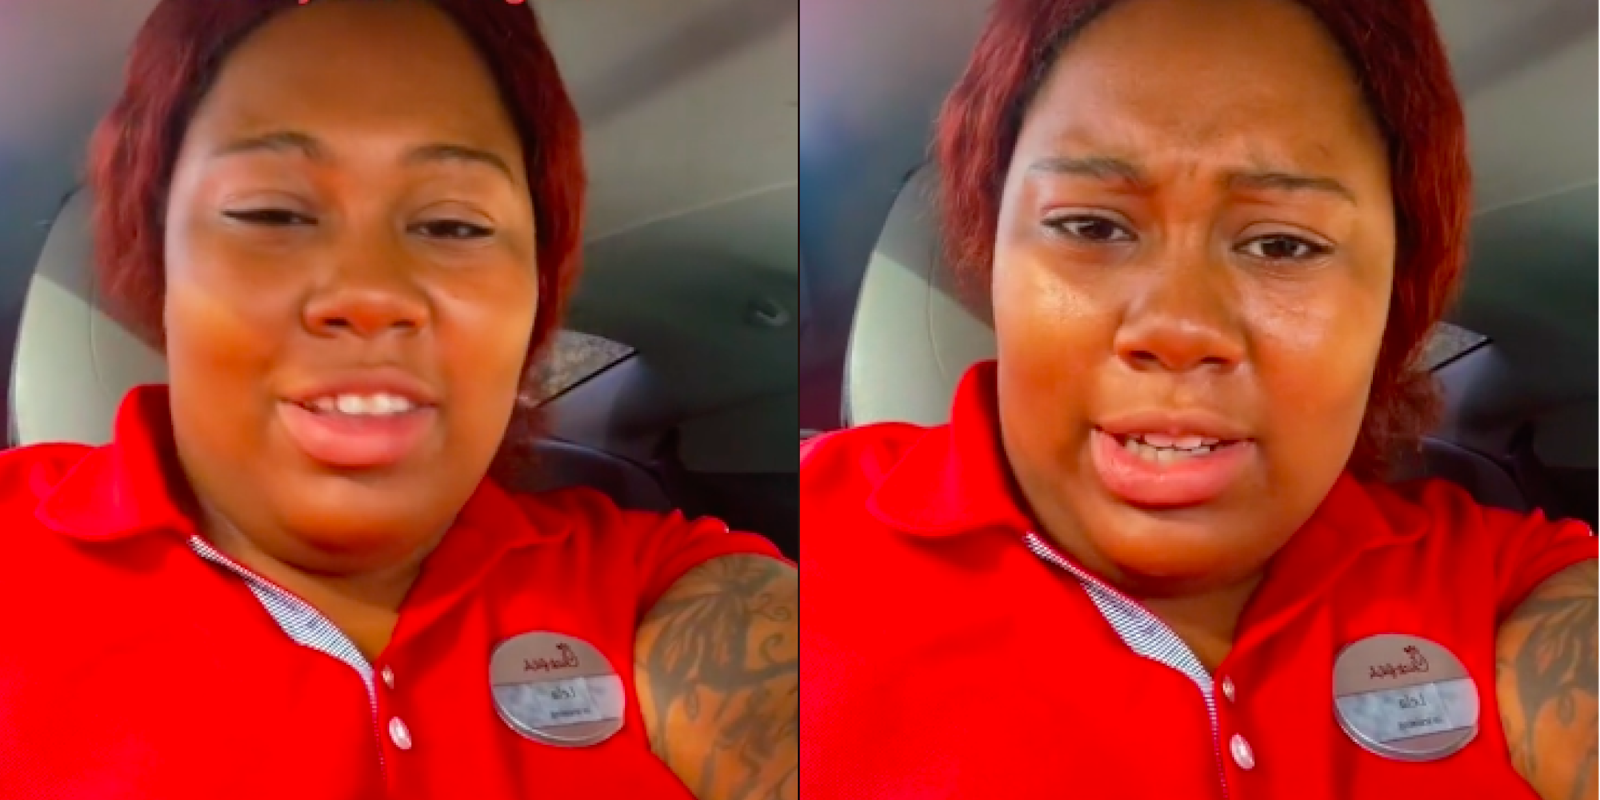 Chick-Fil-A worker talks about experience working there